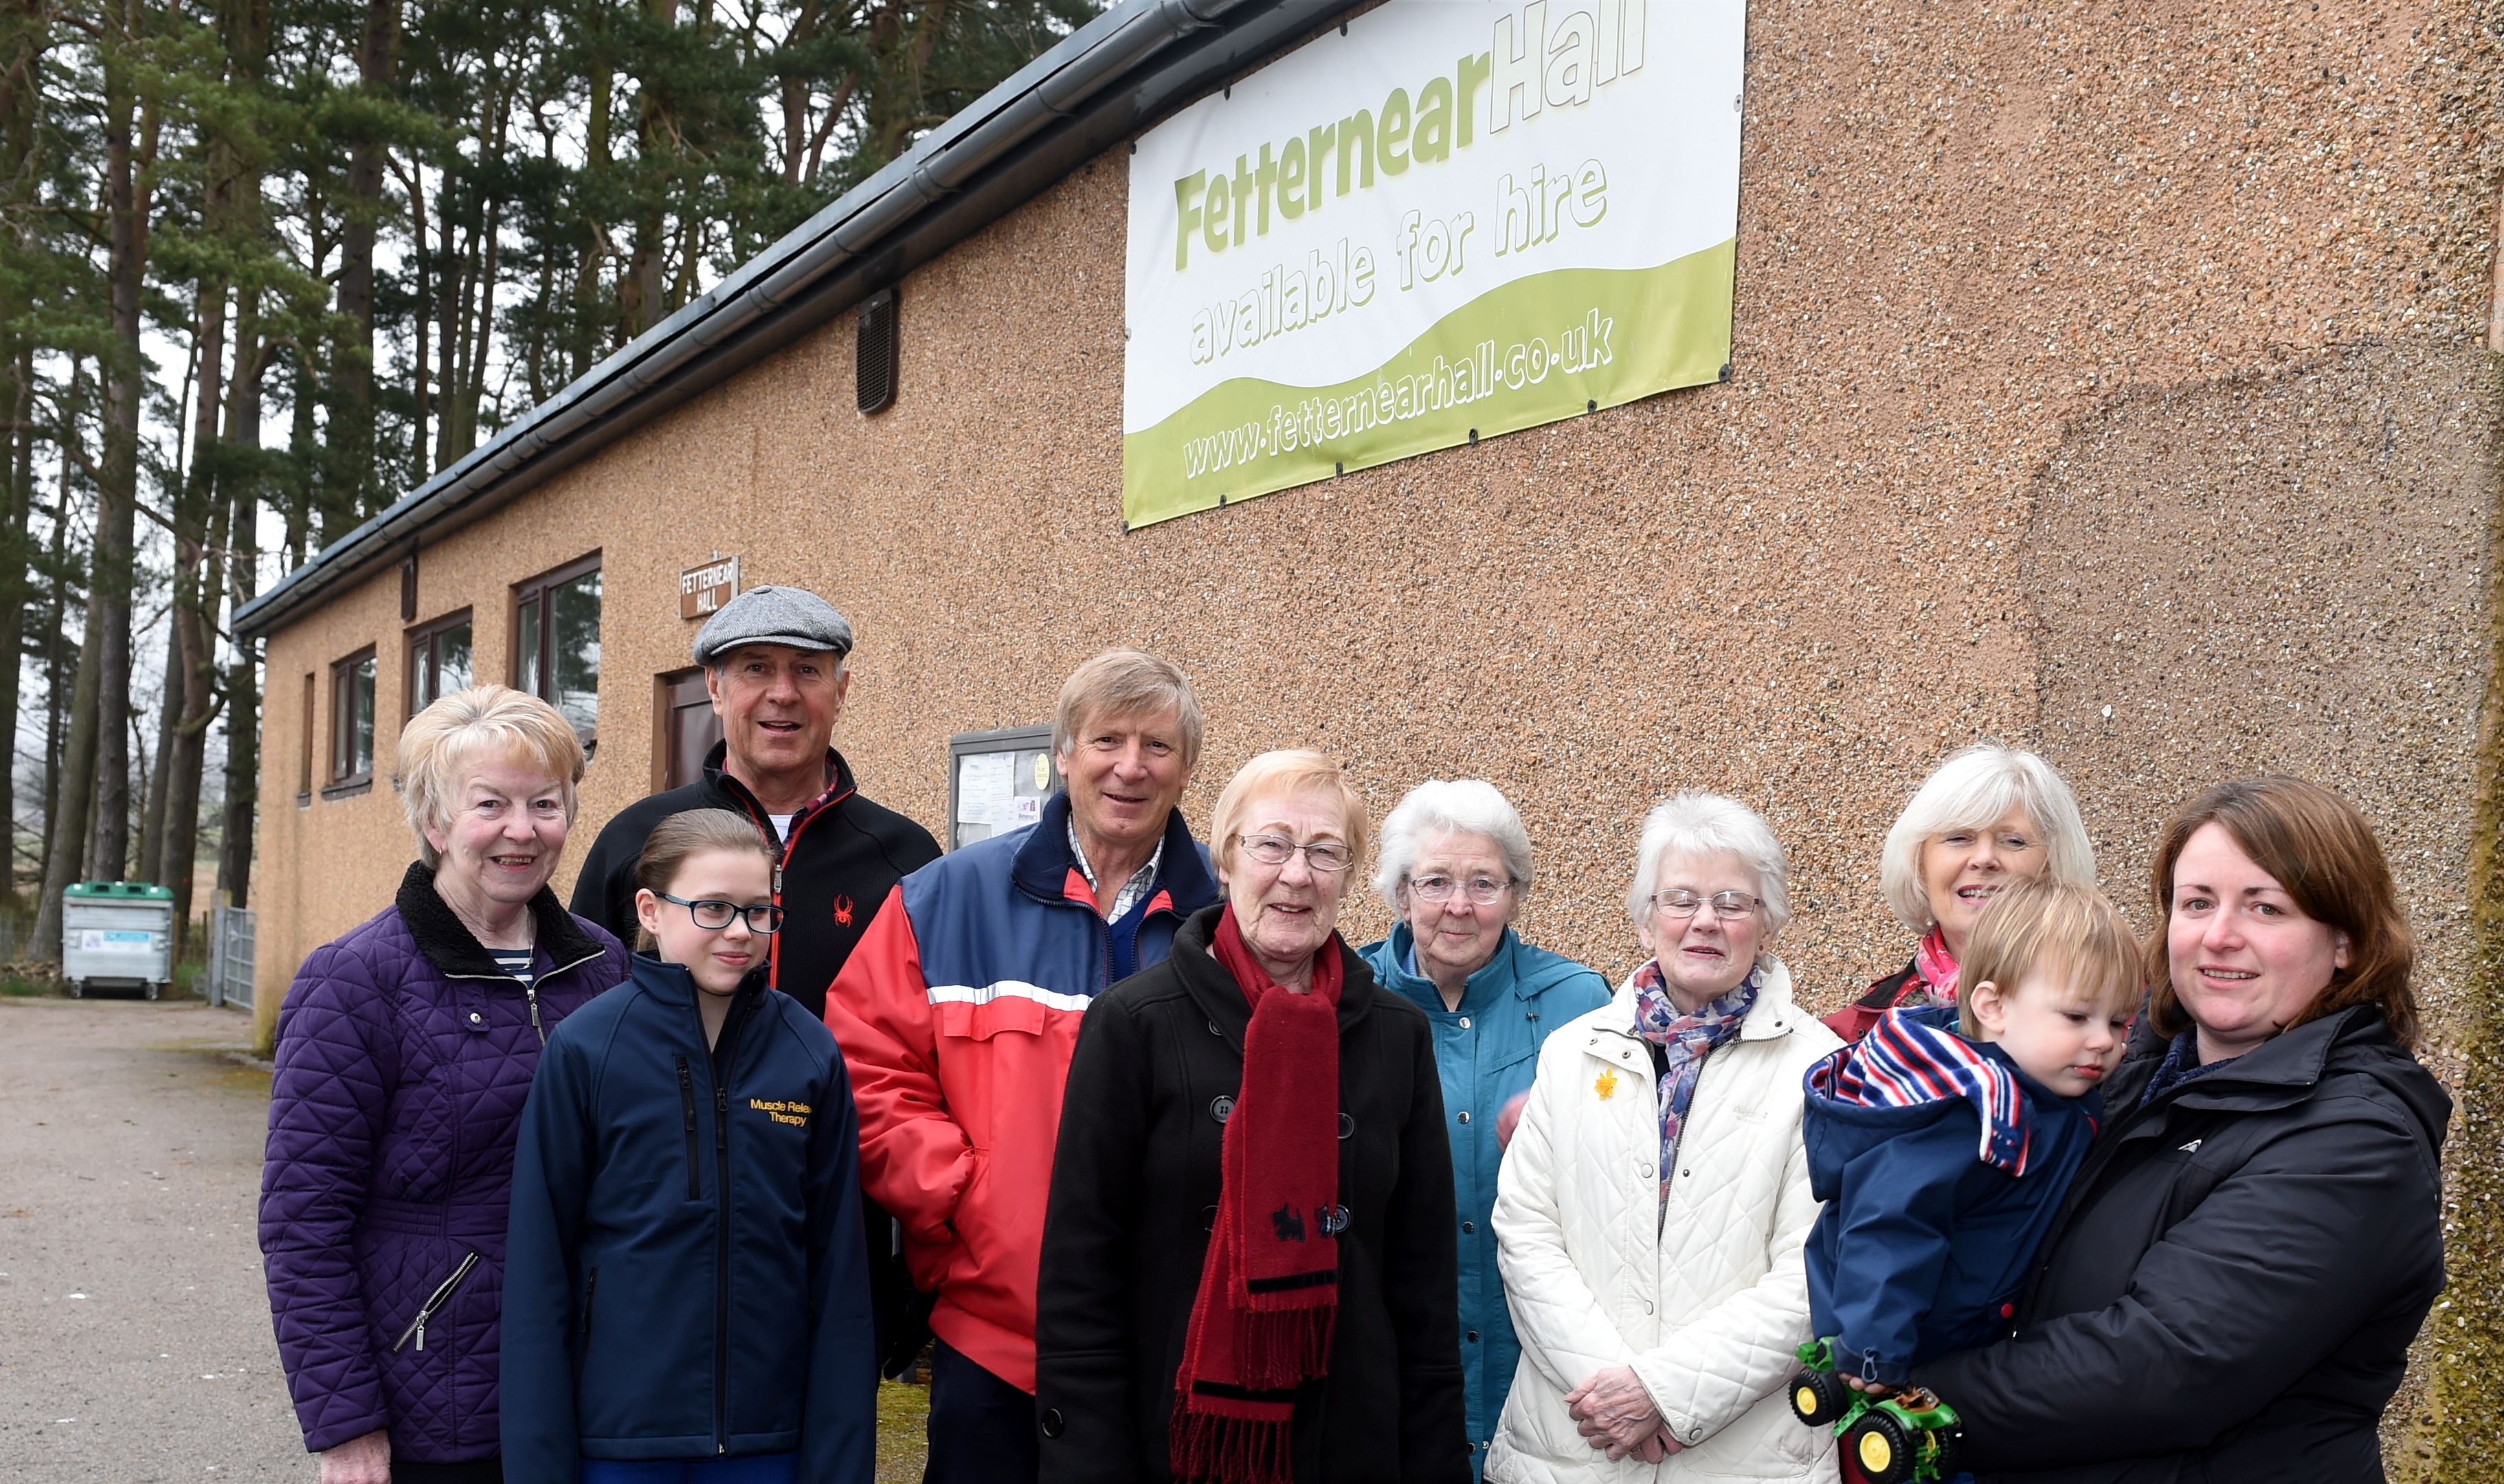 Looking for to get a new roof are the members at Fetternear Hall, Kemnay.